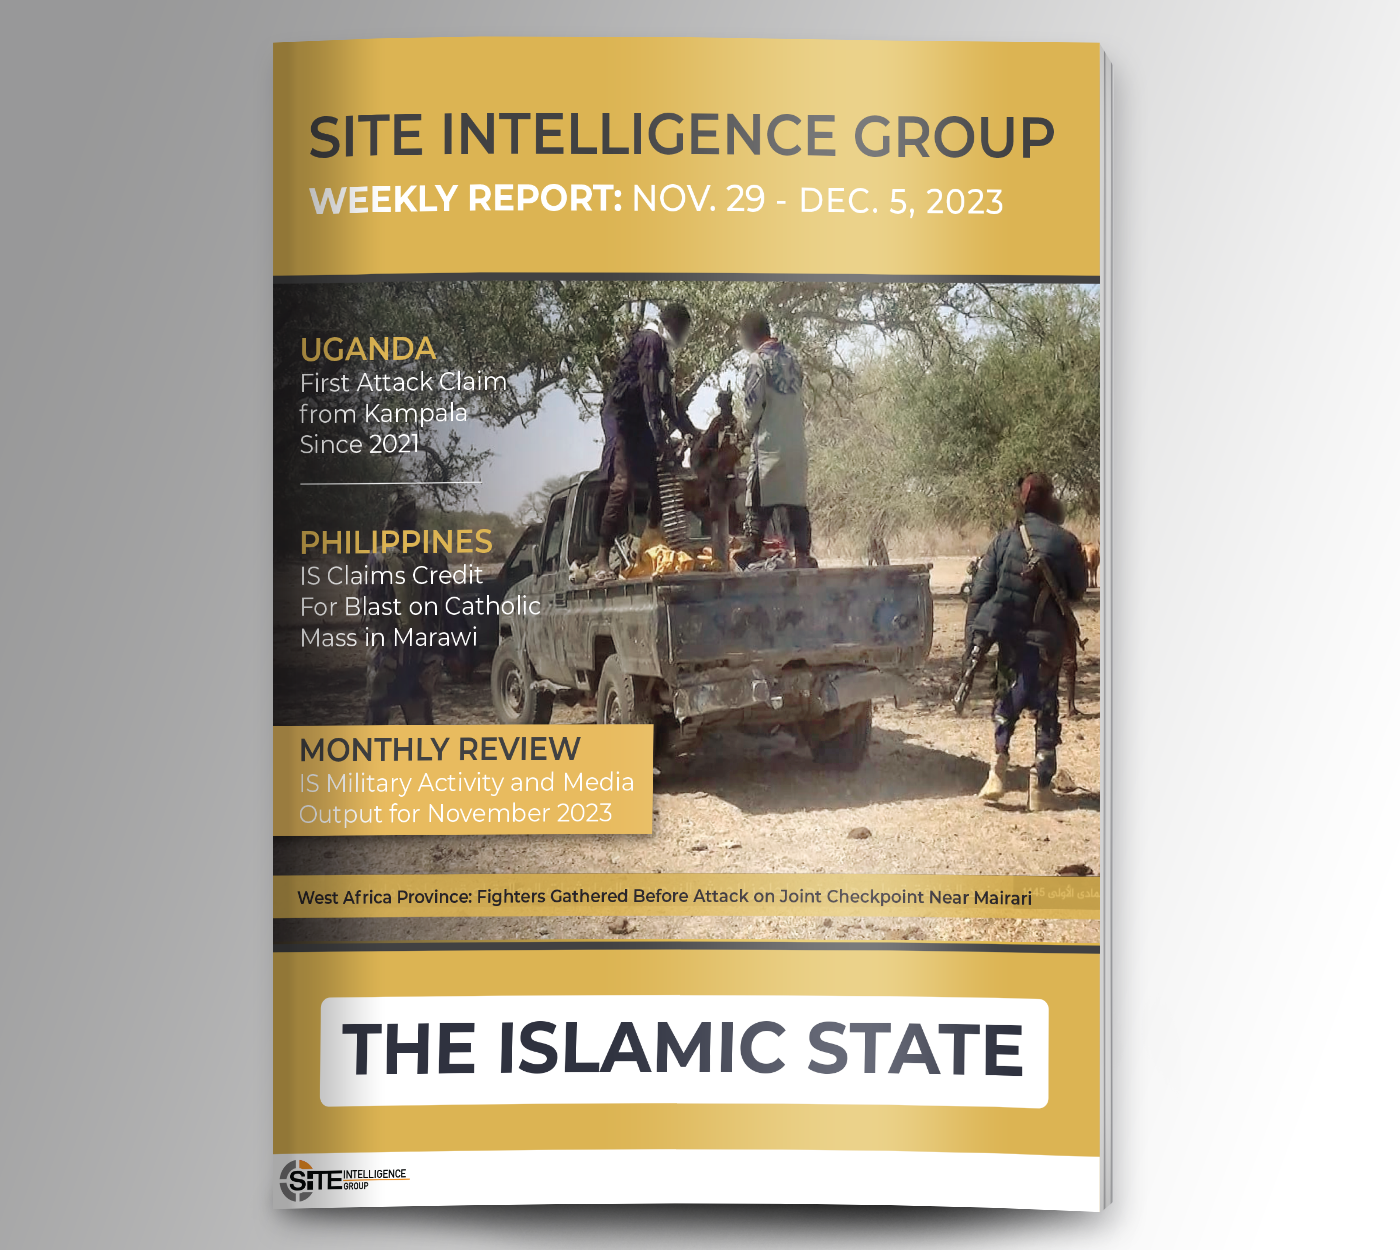 Weekly inSITE on the Islamic State for November 29-December 5, 2023